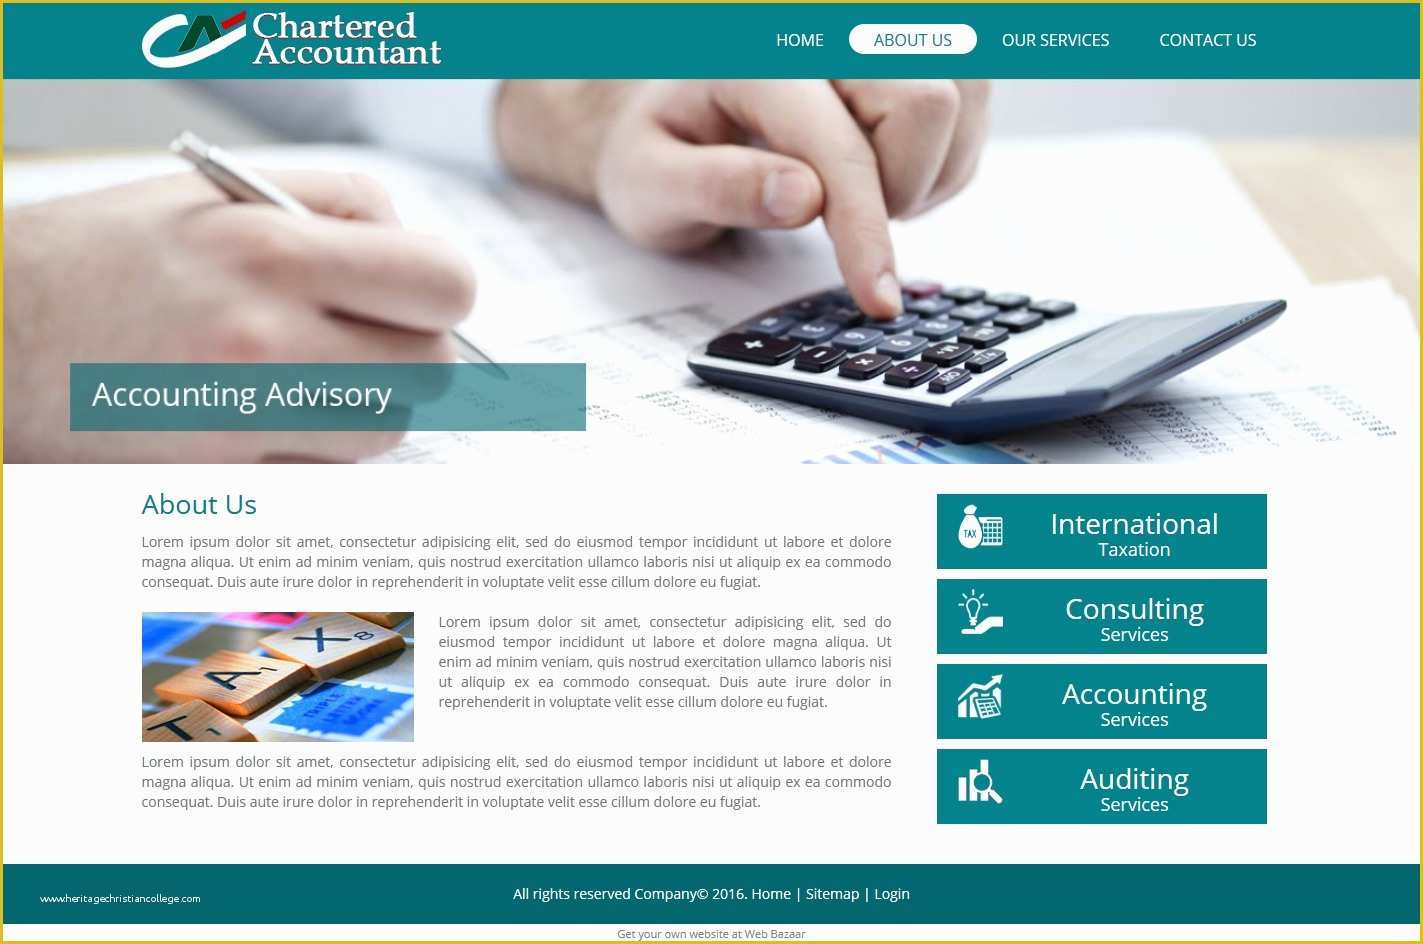 Chartered Accountant Website Templates Free Download Of Chartered Accountants Website Templates Spreadsheet